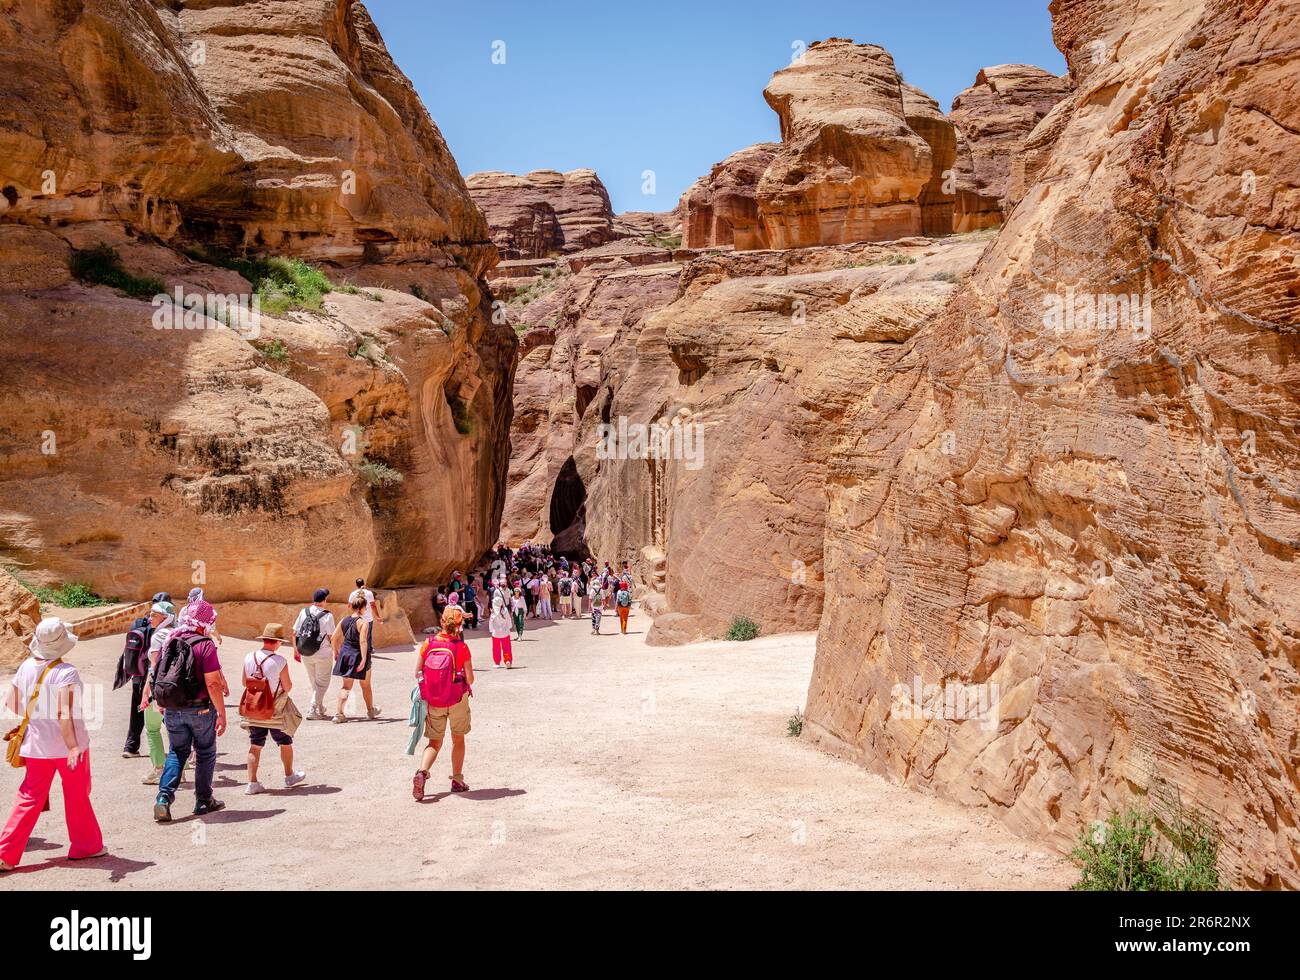 Tourists walk towards the Siq, the narrow gorge that is the main entrance leading to the Treasury and the ancient city of Petra, in Jordan. Stock Photo